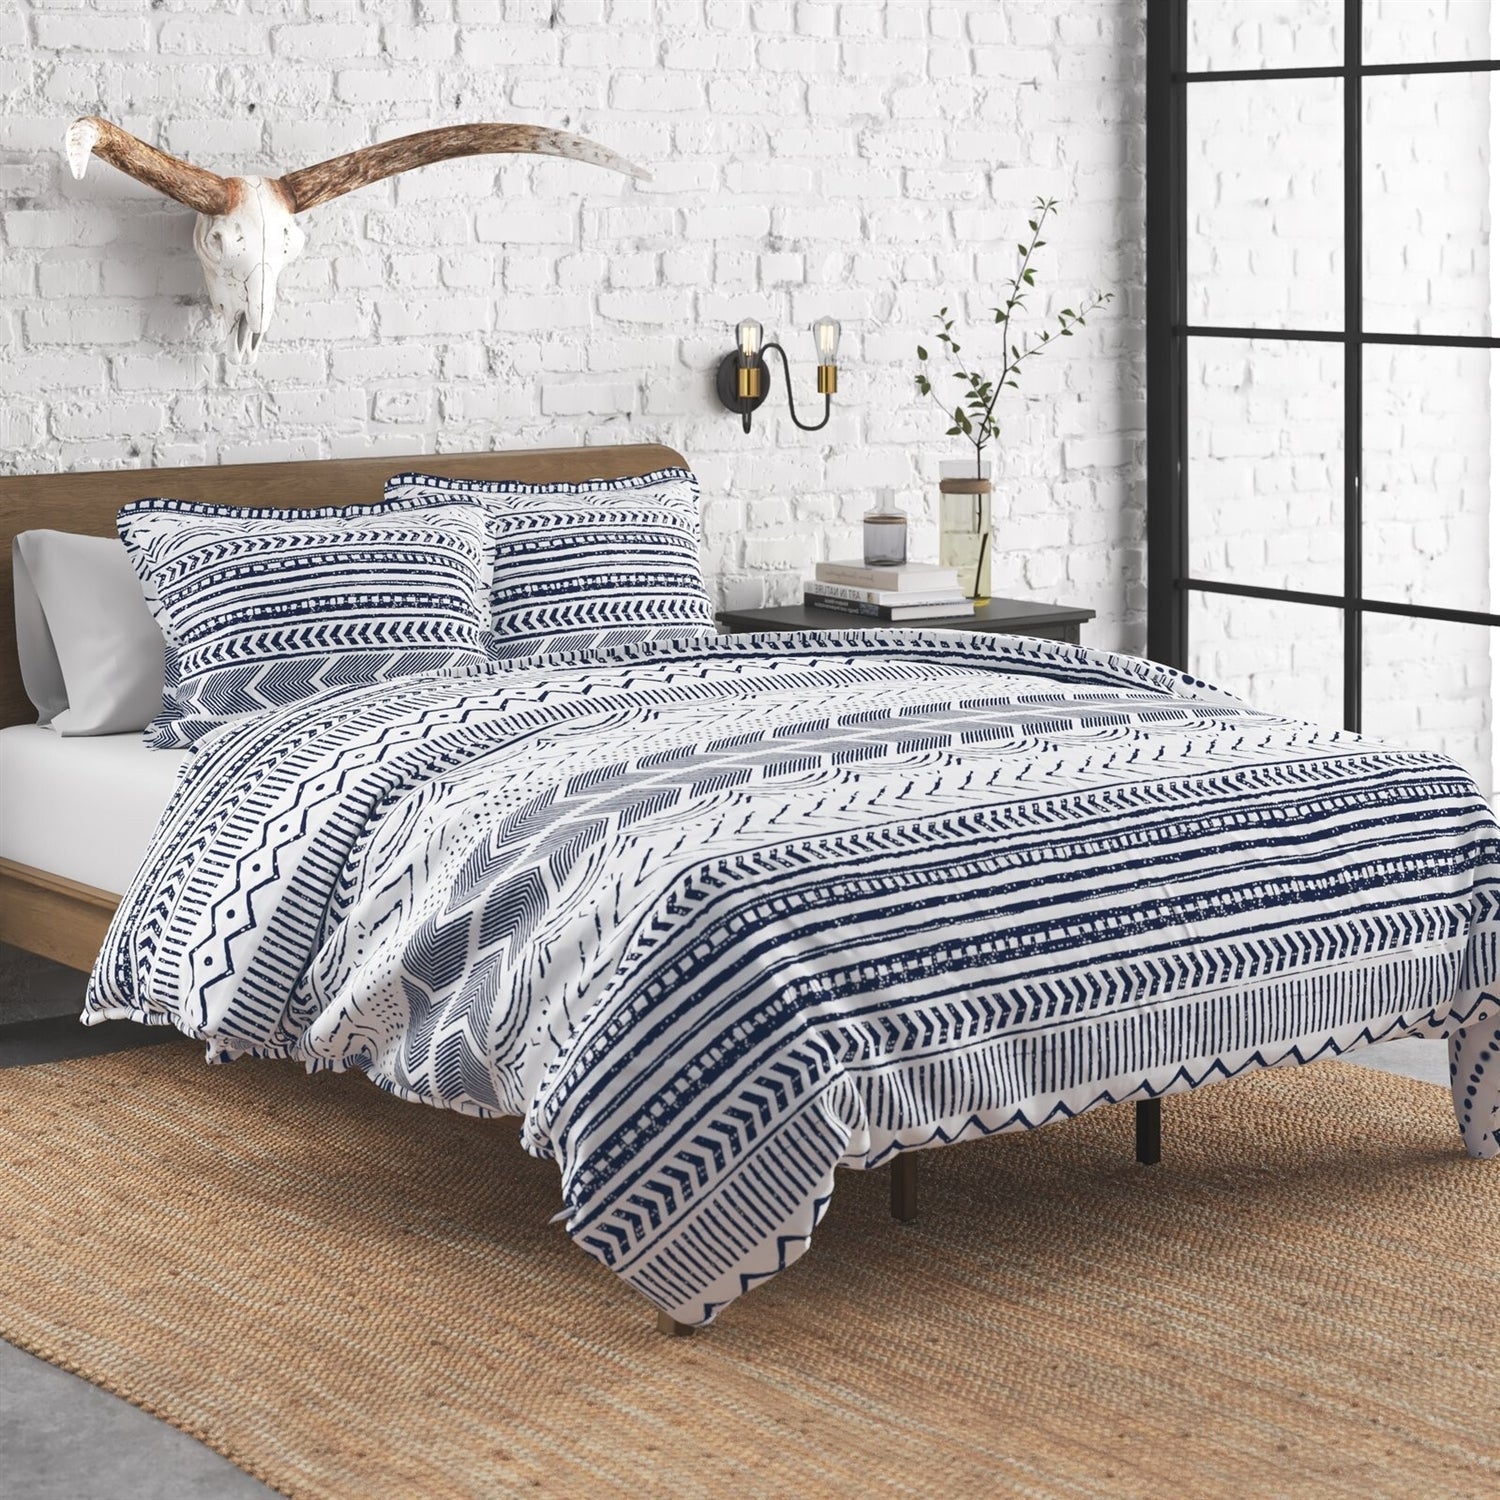 Bedroom > Quilts & Blankets - 3 Piece Scandinavian Blue White Reversible Cotton Set In King